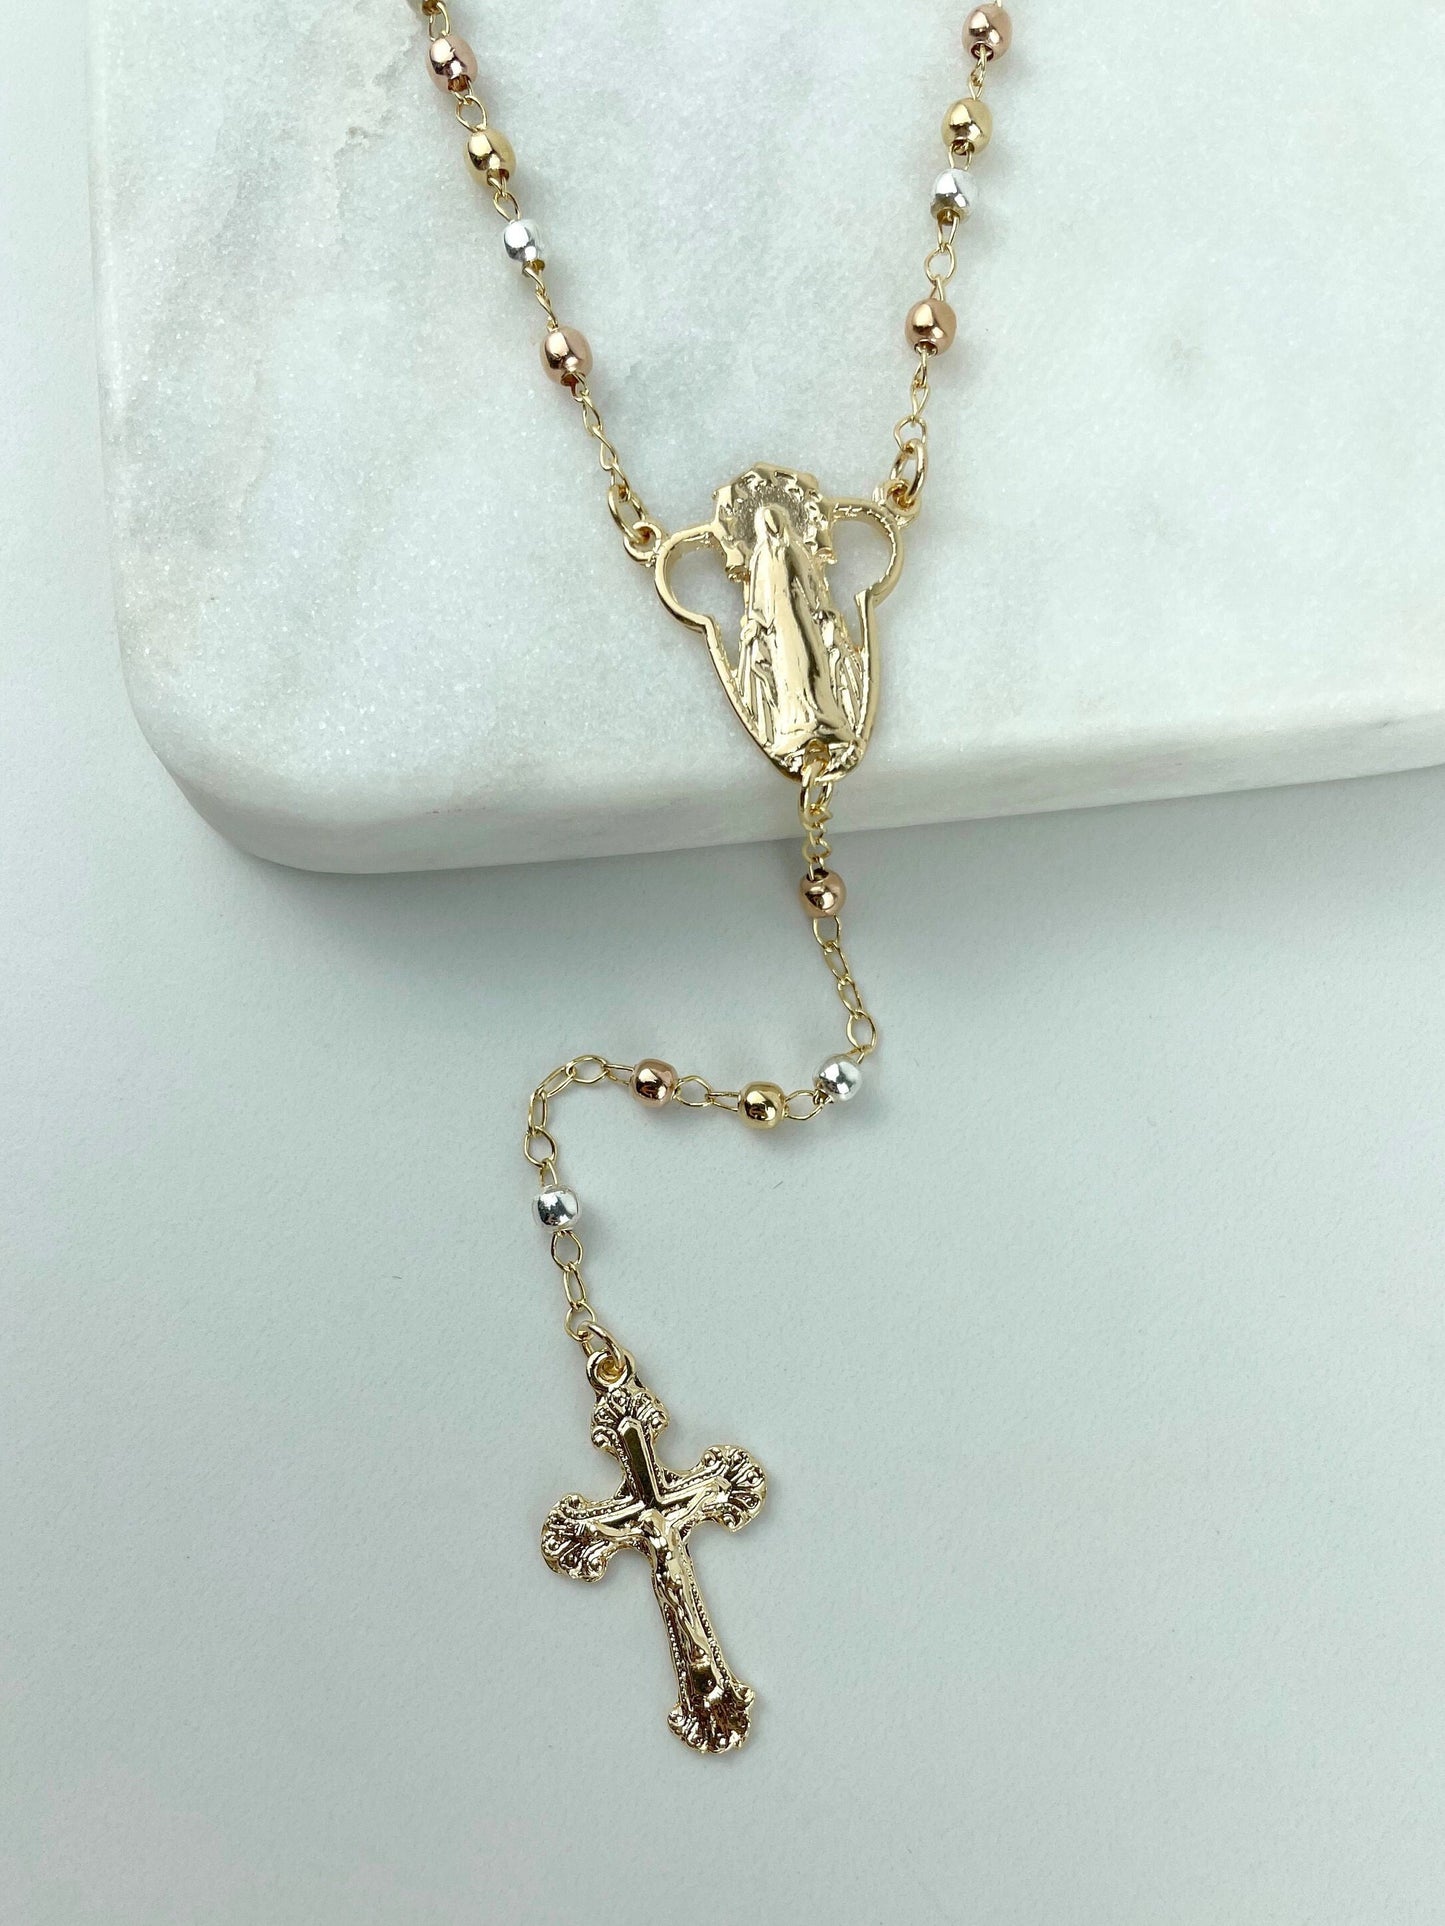 18k Gold Filled Virgen Milagrosa Three Tone Rosary With Crucifix, 20 Inches, Wholesale Jewelry Making Supplies